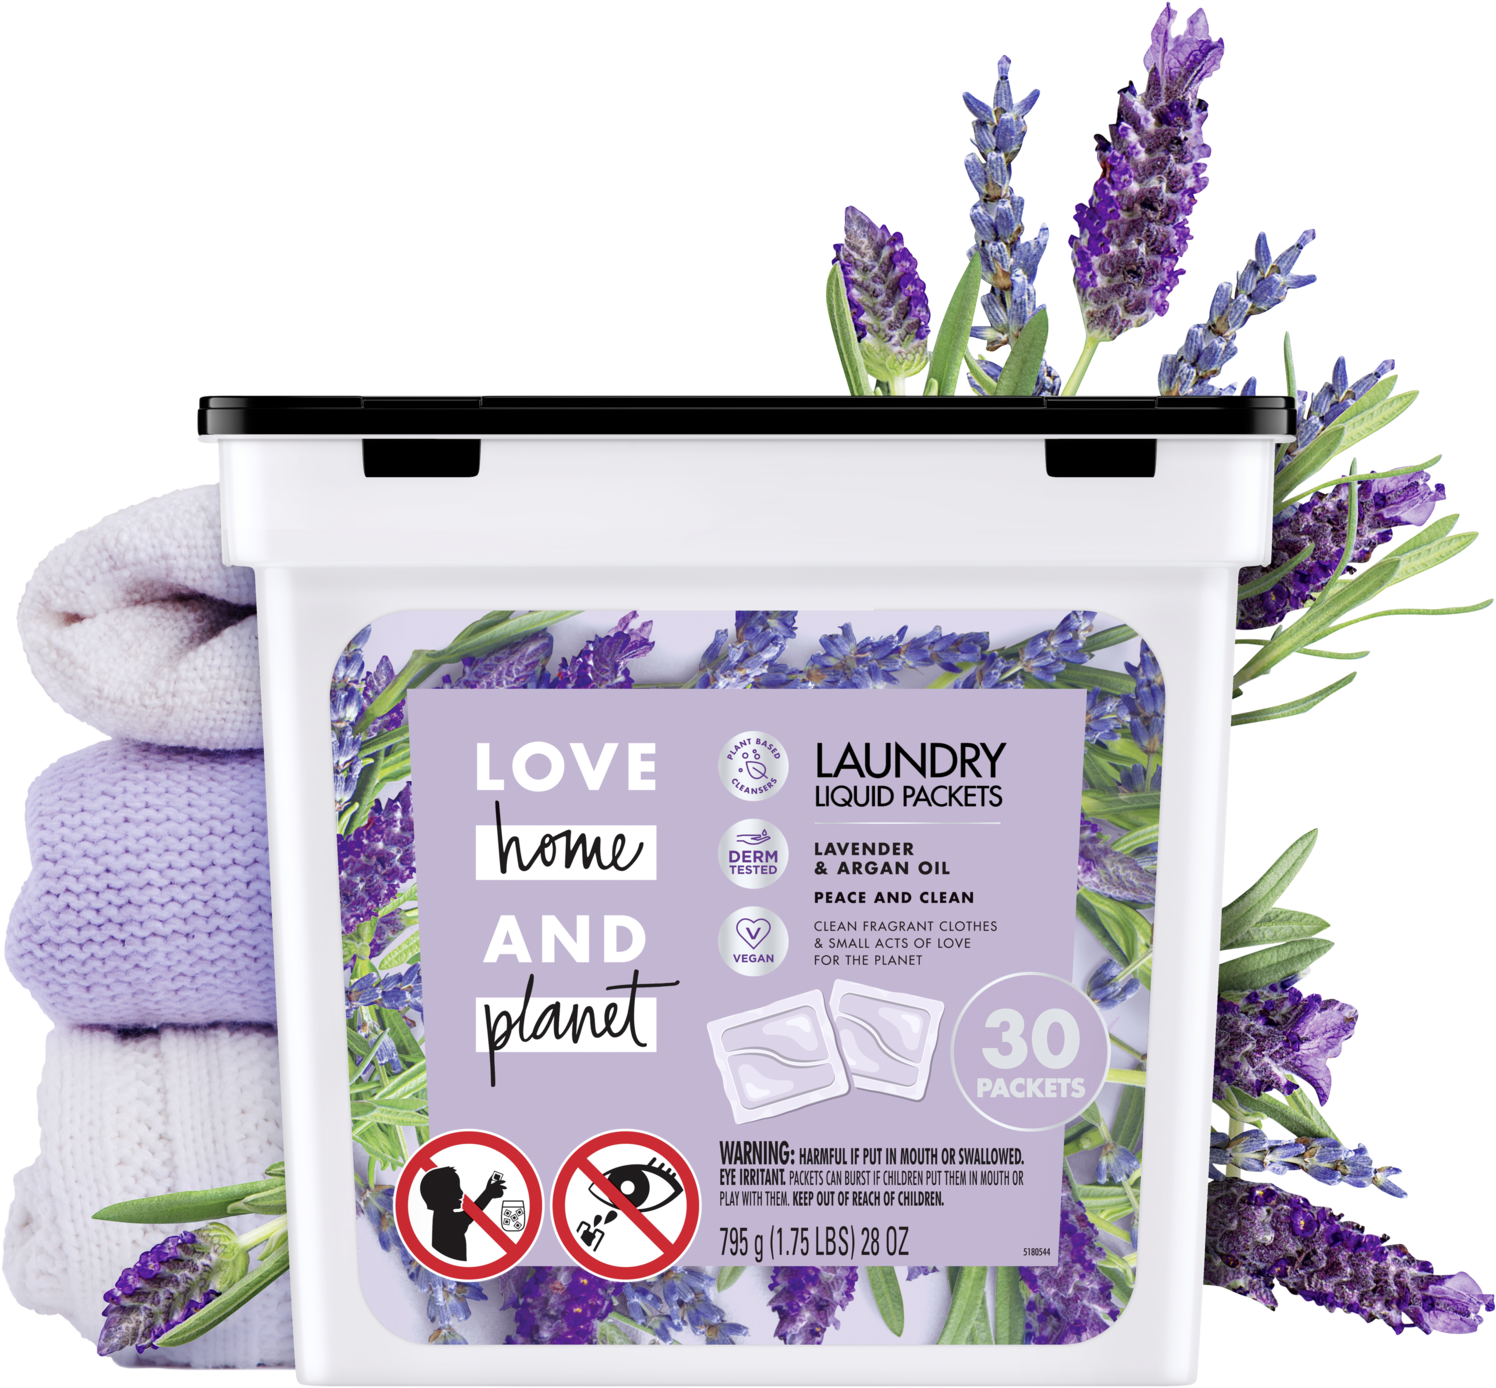 Lavender Laundry Packets Product Display